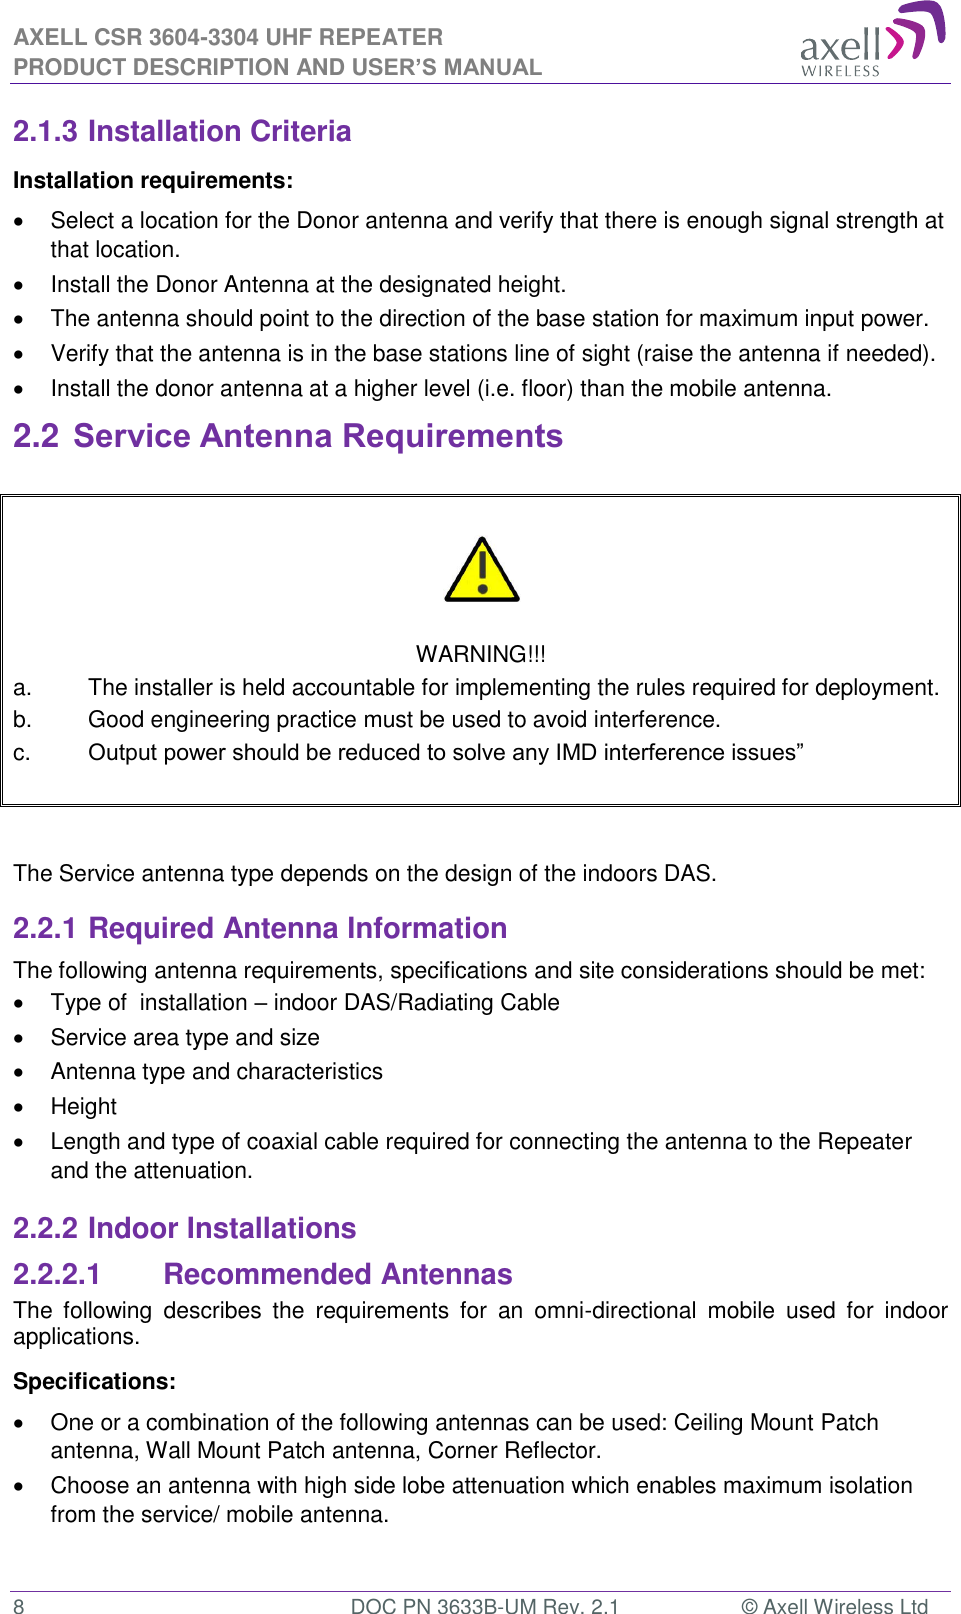 AXELL CSR 3604-3304 UHF REPEATER PRODUCT DESCRIPTION AND USER’S MANUAL  8  DOC PN 3633B-UM Rev. 2.1  © Axell Wireless Ltd  2.1.3 Installation Criteria Installation requirements:   Select a location for the Donor antenna and verify that there is enough signal strength at that location.   Install the Donor Antenna at the designated height.   The antenna should point to the direction of the base station for maximum input power.   Verify that the antenna is in the base stations line of sight (raise the antenna if needed).    Install the donor antenna at a higher level (i.e. floor) than the mobile antenna. 2.2 Service Antenna Requirements     WARNING!!! a.  The installer is held accountable for implementing the rules required for deployment. b.  Good engineering practice must be used to avoid interference. c.  Output power should be reduced to solve any IMD interference issues”    The Service antenna type depends on the design of the indoors DAS.  2.2.1 Required Antenna Information The following antenna requirements, specifications and site considerations should be met:   Type of  installation – indoor DAS/Radiating Cable   Service area type and size    Antenna type and characteristics   Height   Length and type of coaxial cable required for connecting the antenna to the Repeater and the attenuation. 2.2.2 Indoor Installations 2.2.2.1  Recommended Antennas The  following  describes  the  requirements  for  an  omni-directional  mobile  used  for  indoor applications. Specifications:   One or a combination of the following antennas can be used: Ceiling Mount Patch antenna, Wall Mount Patch antenna, Corner Reflector.   Choose an antenna with high side lobe attenuation which enables maximum isolation from the service/ mobile antenna.  